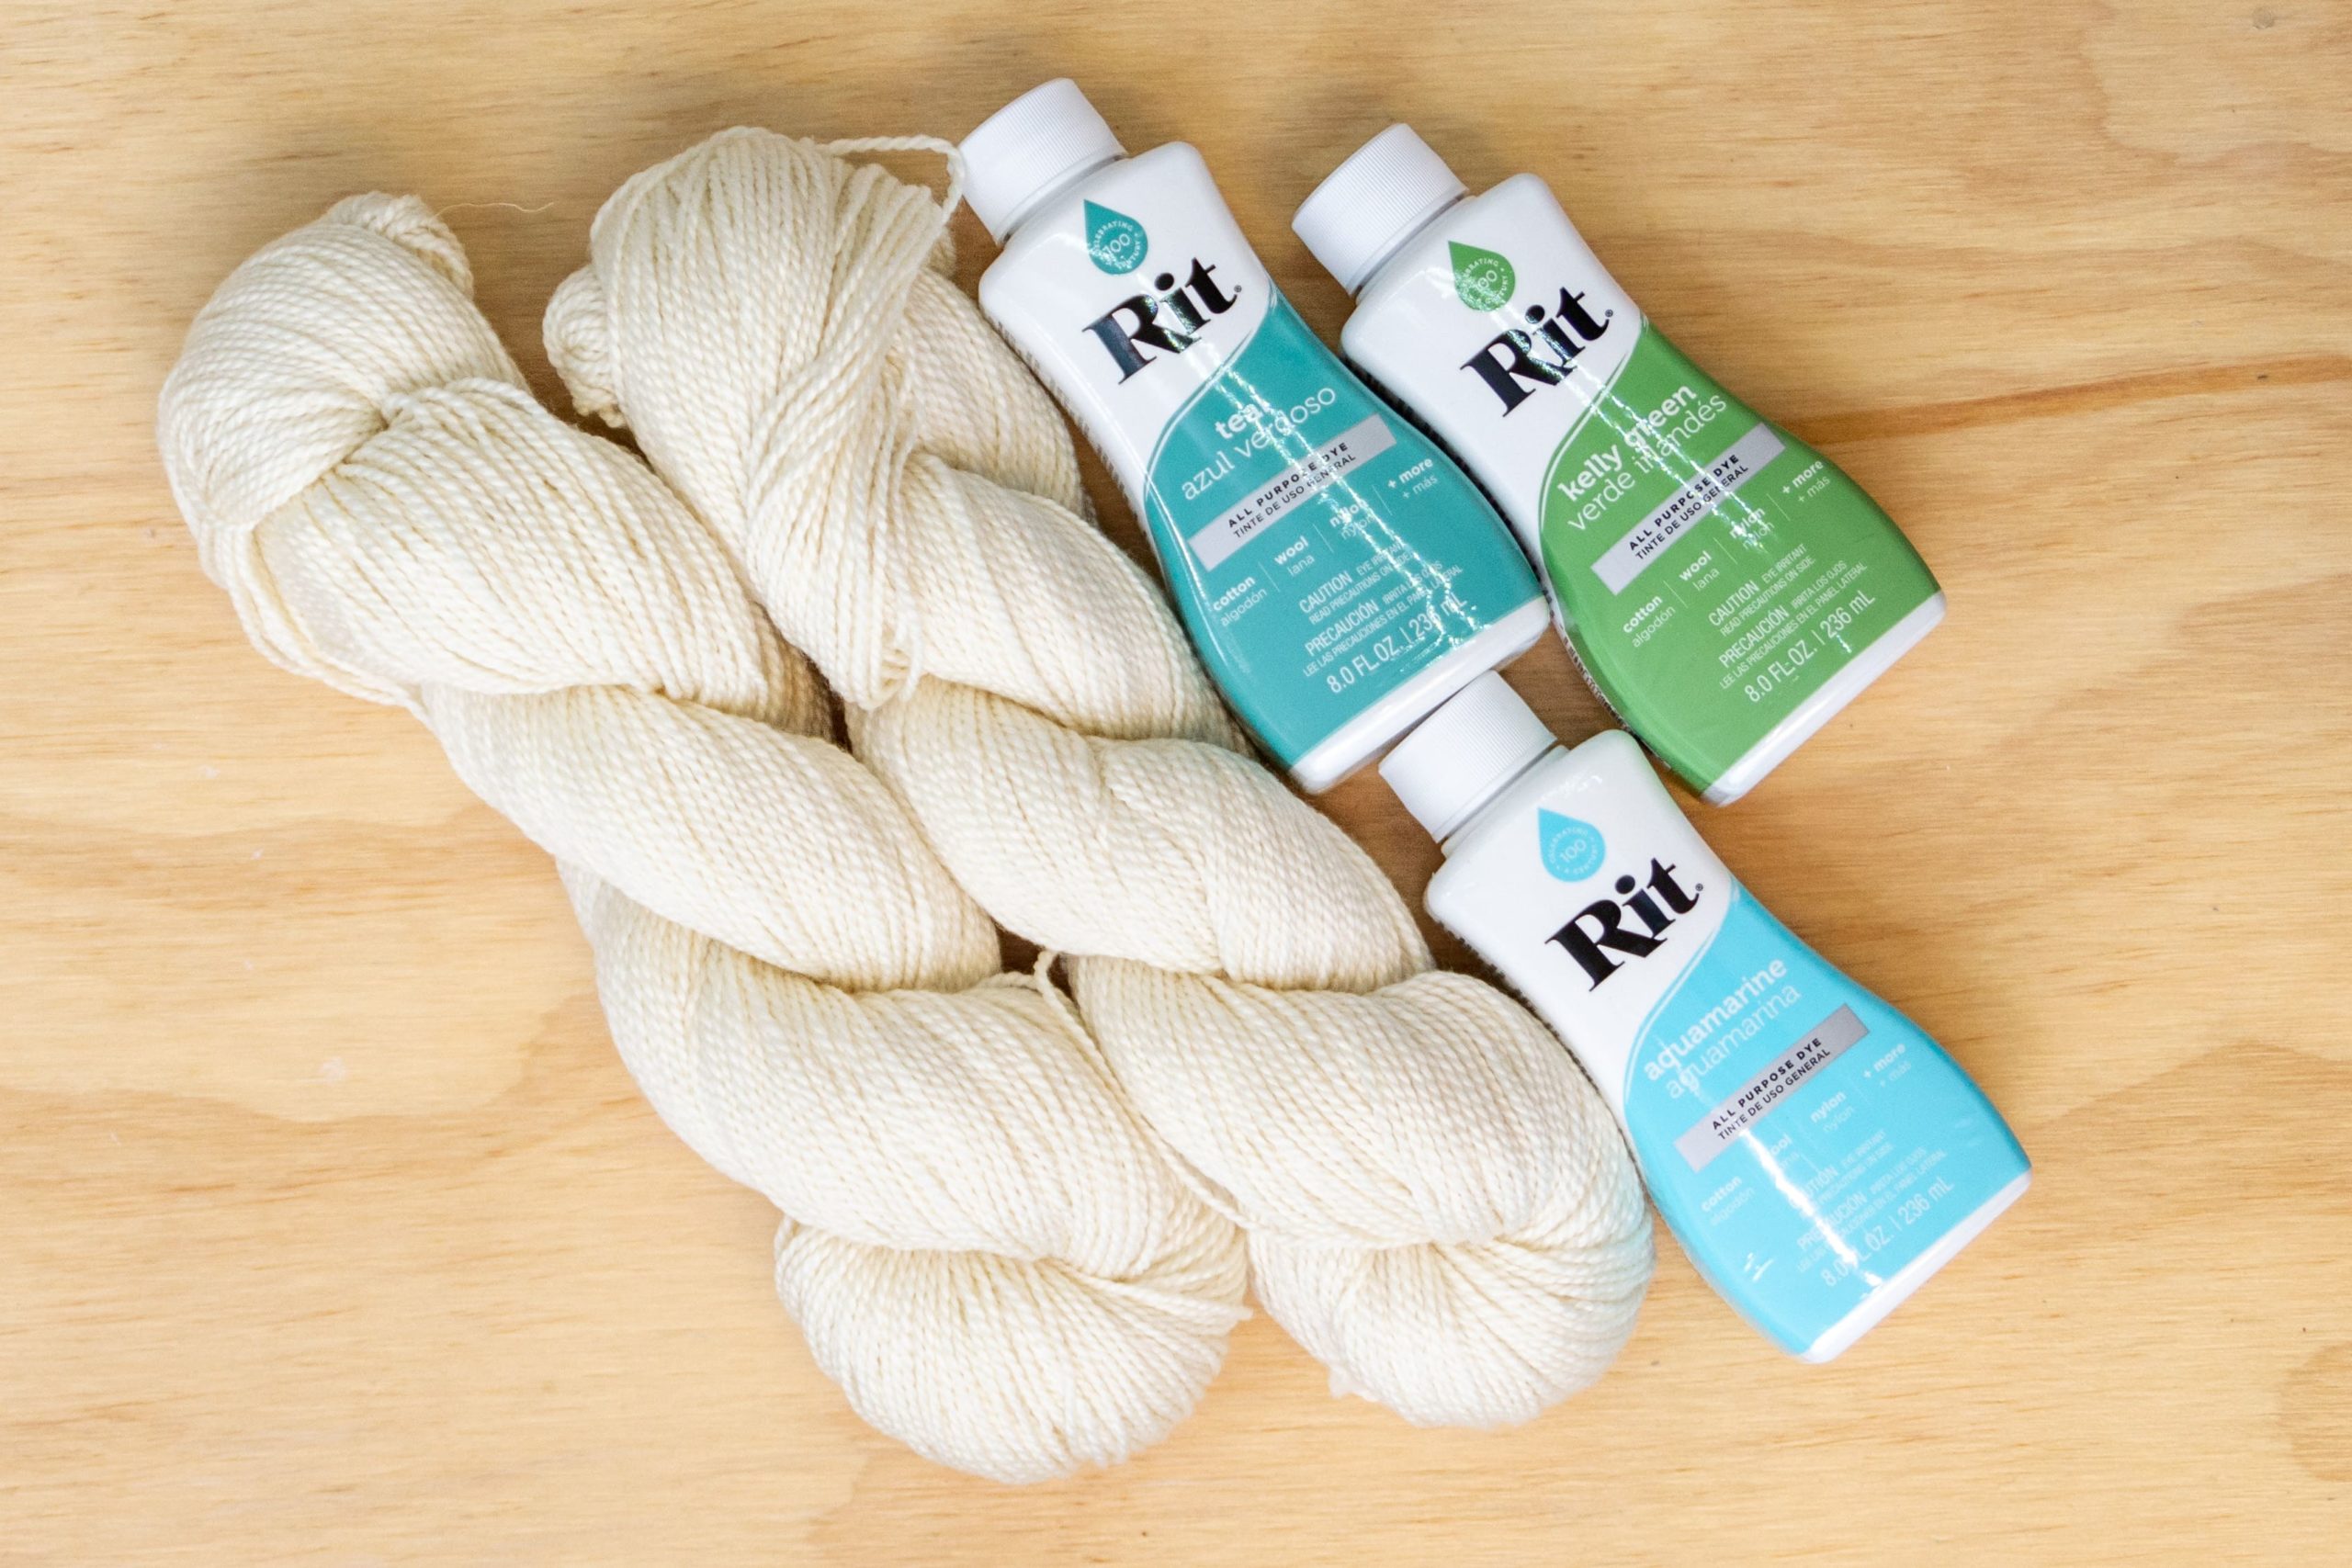 Ocean Blue with RIT Dye - Knomad Yarn Blogs How to Dye